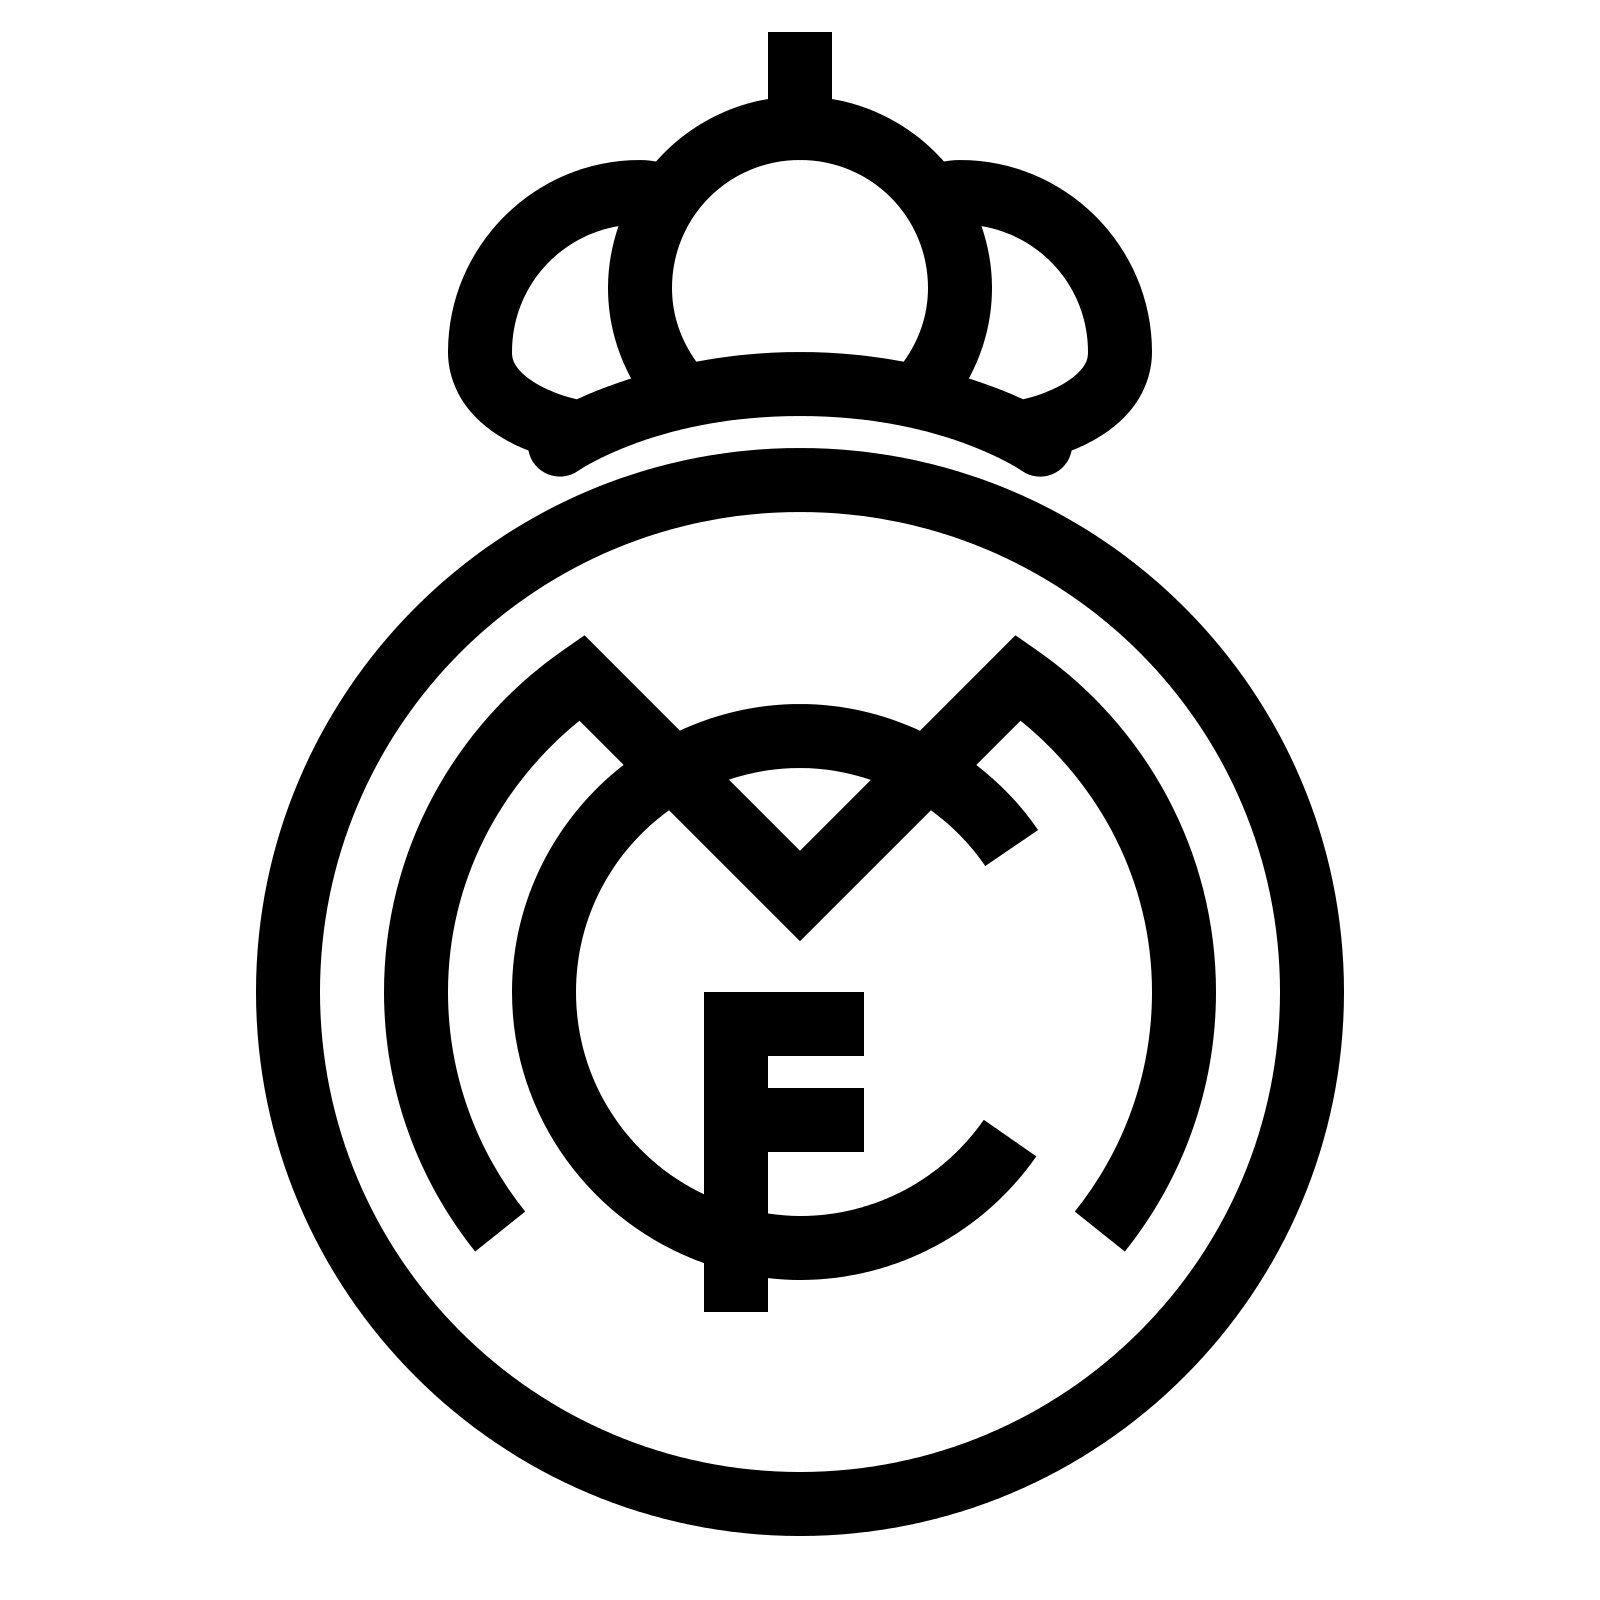 Madrid Logo - Meaning Real Madrid logo and symbol. history and evolution